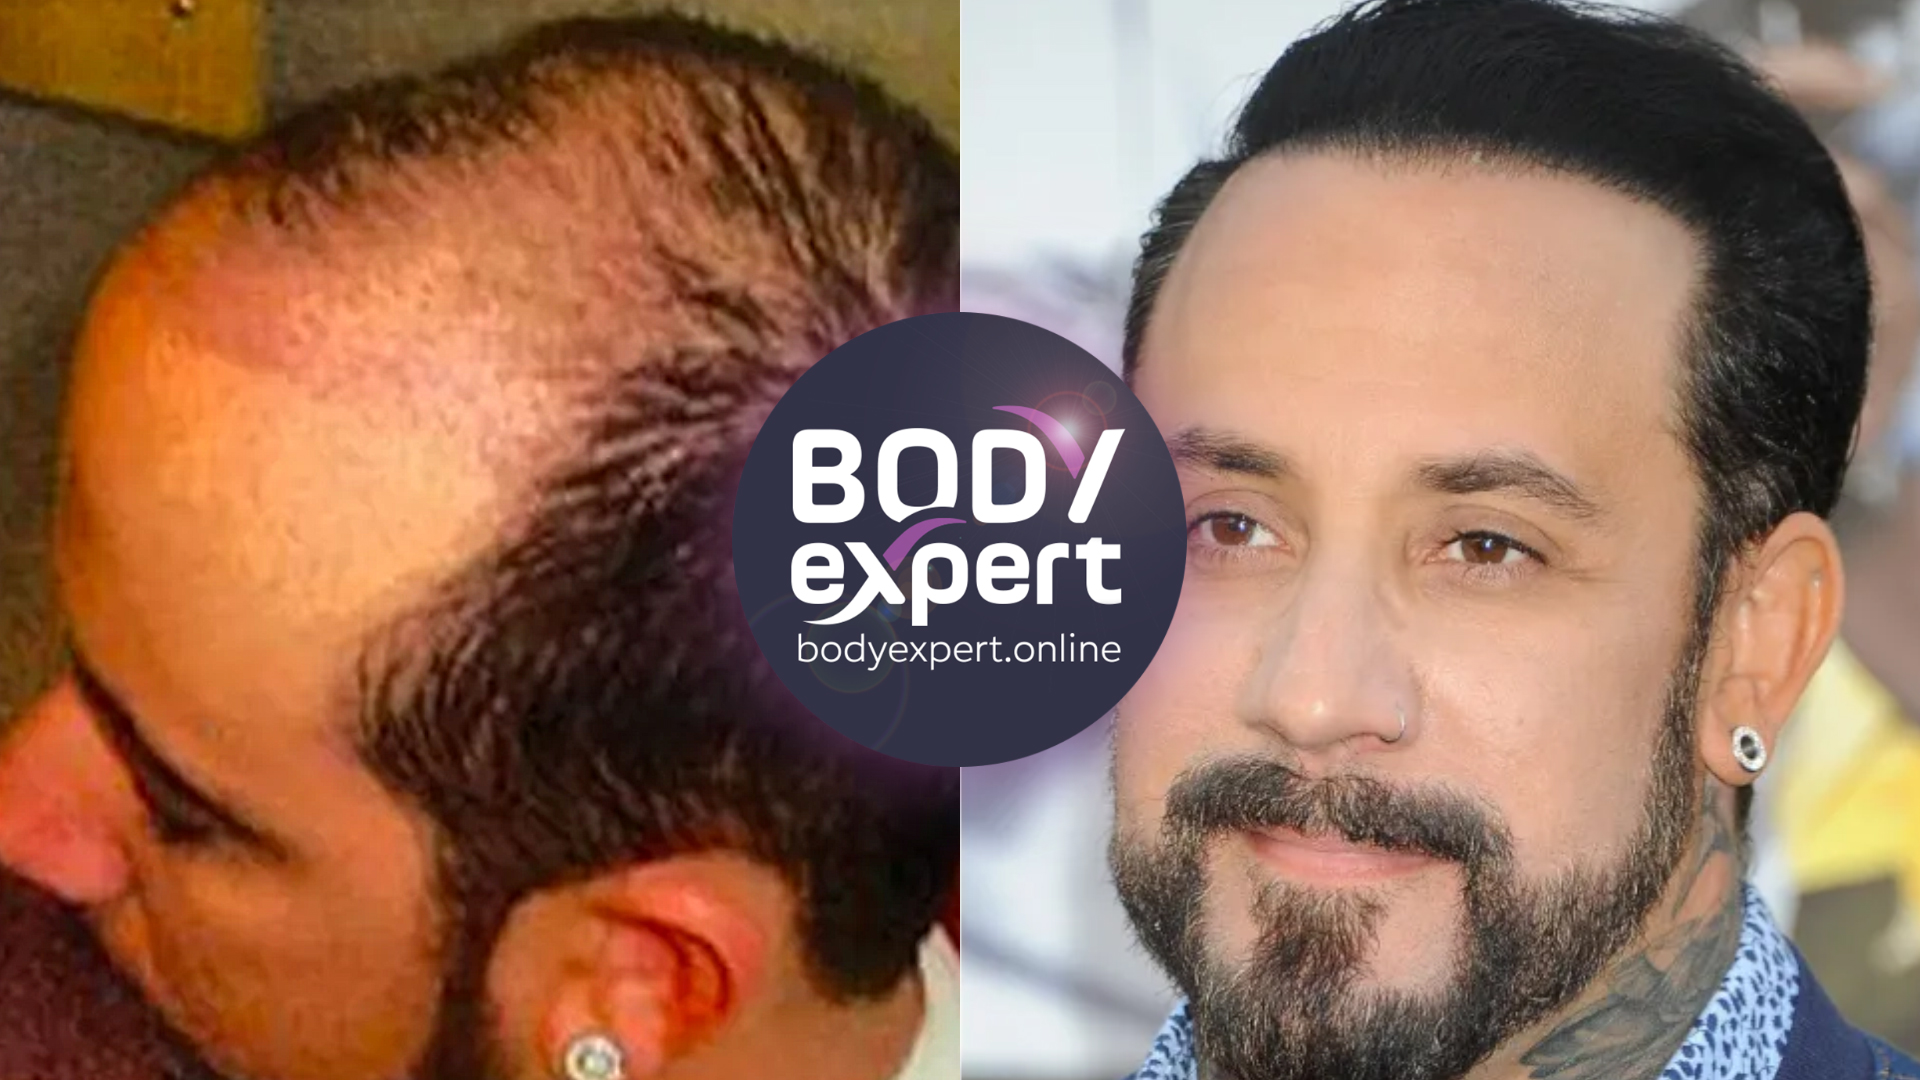 has AJ McLean had a hair transplant? Yes, he openly spoke about it.